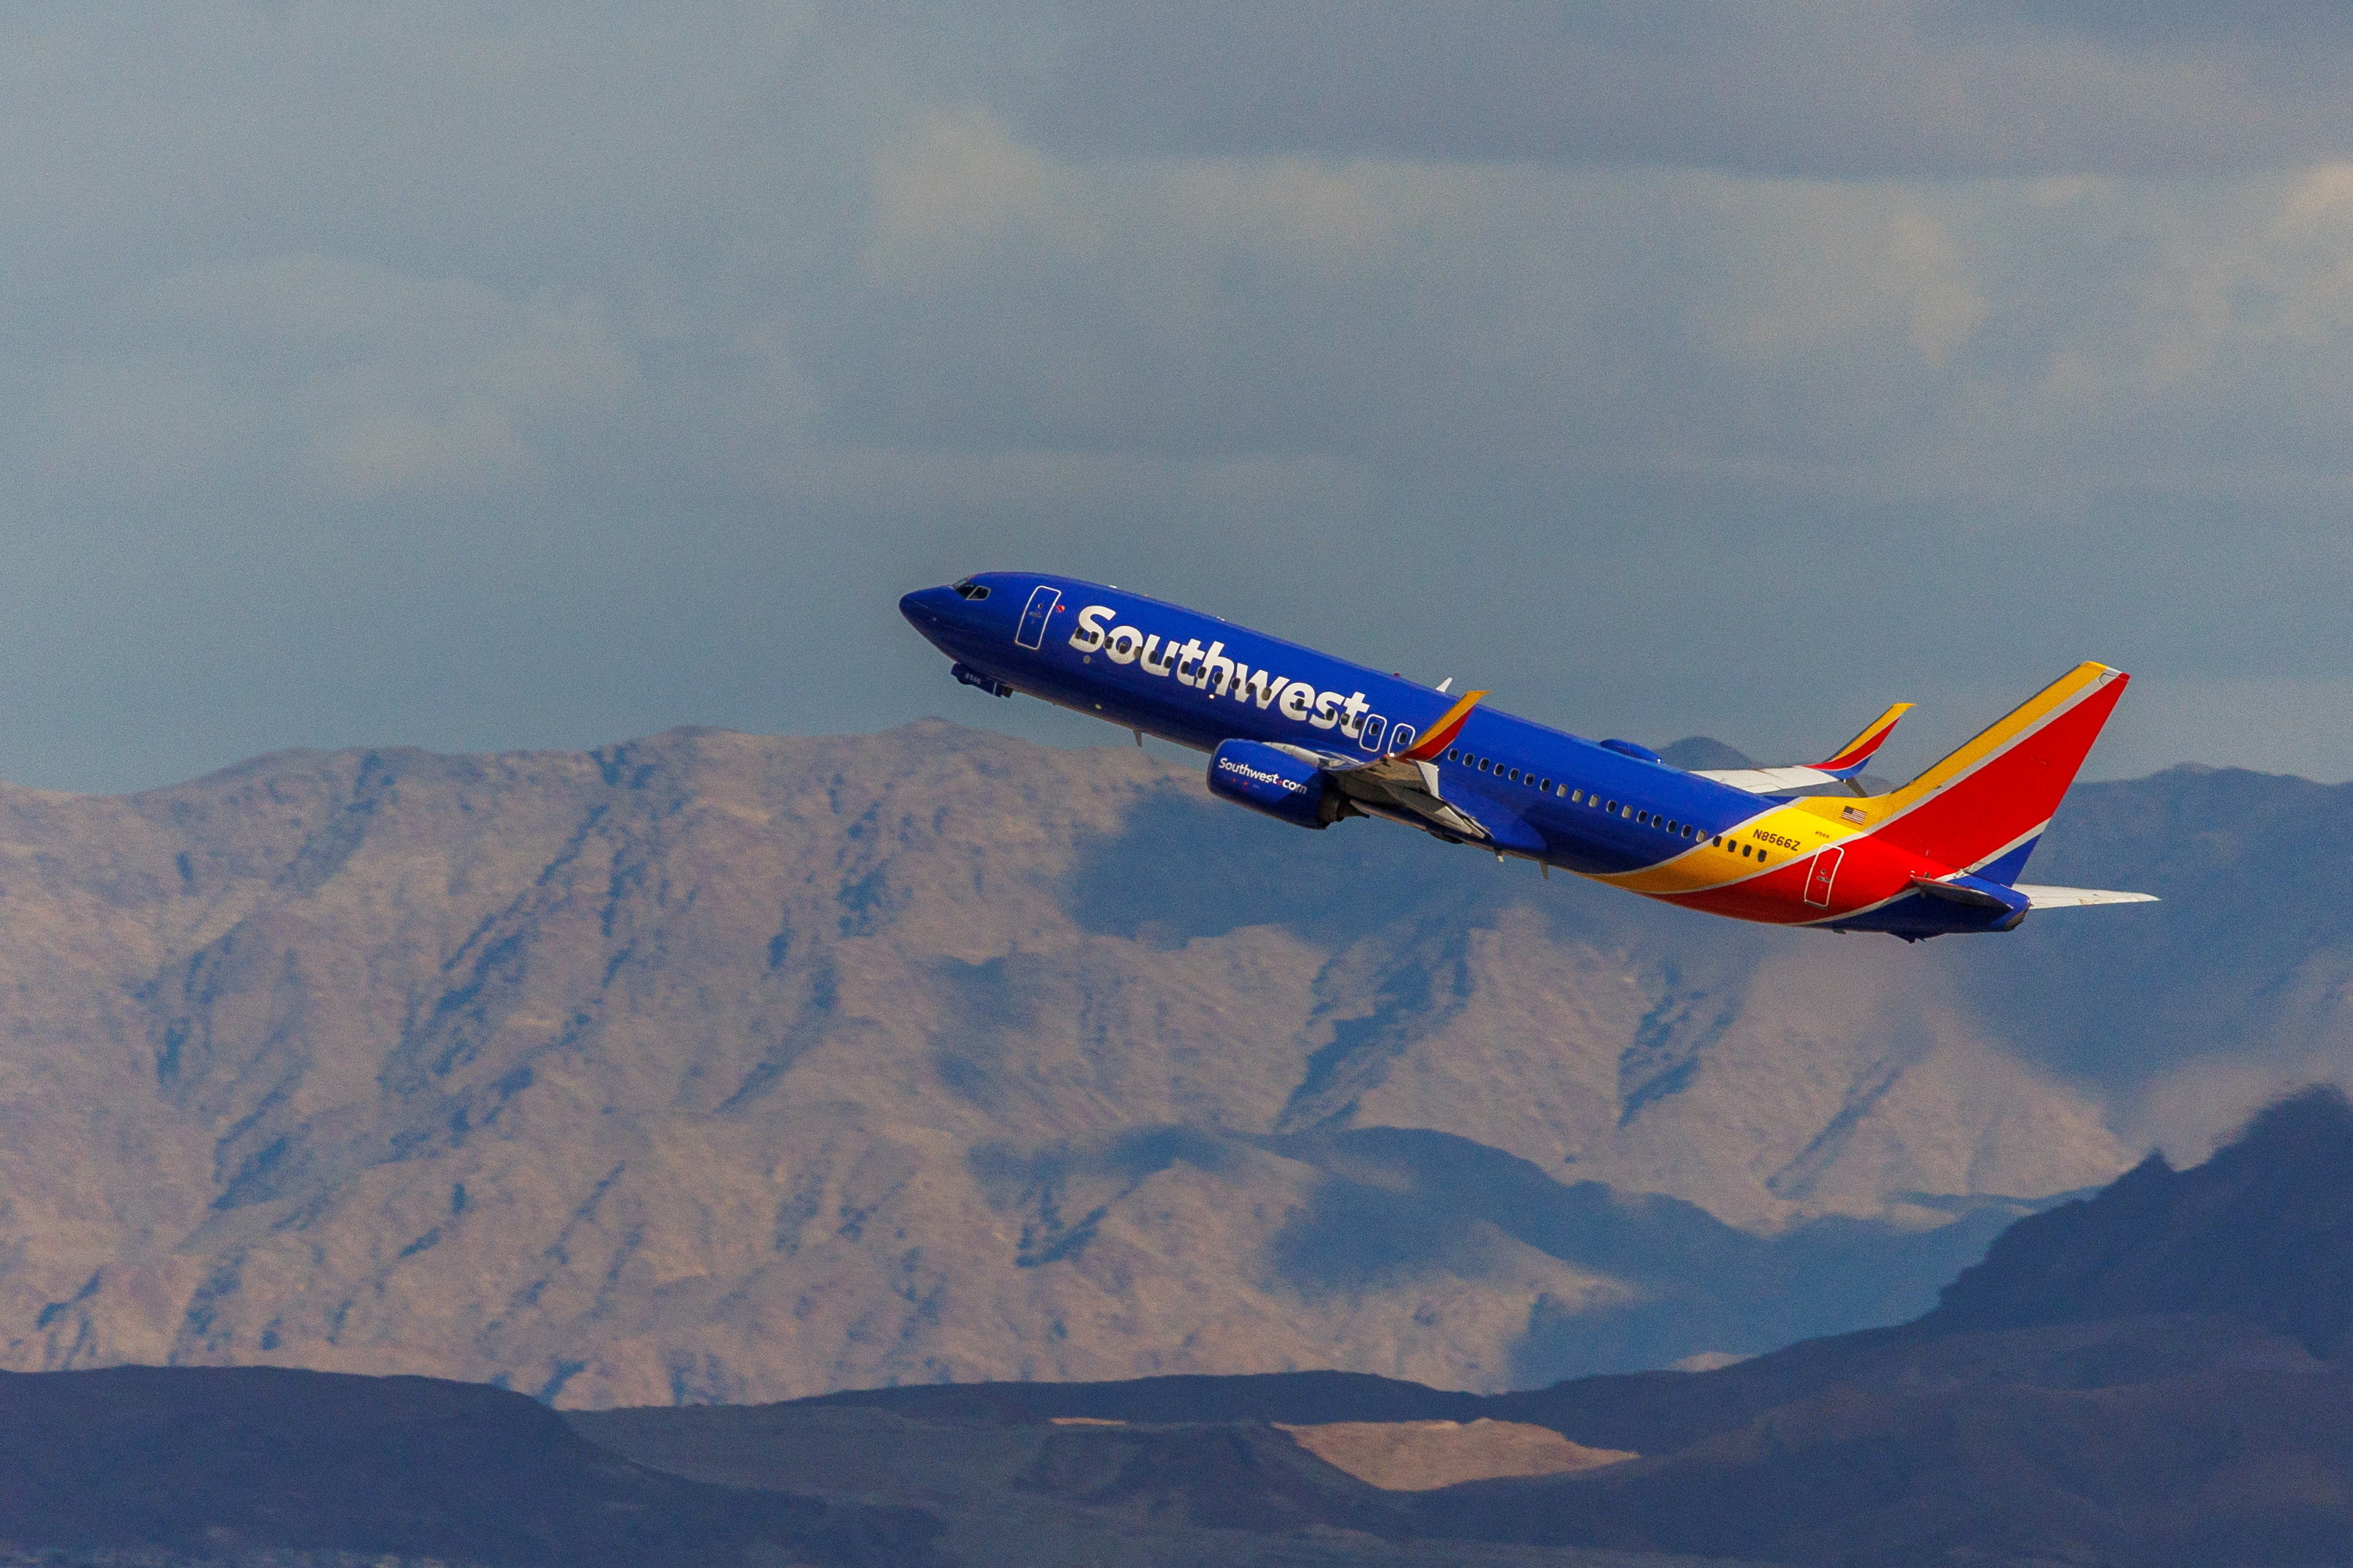 A Southwest airliner takes off from Las Vegas